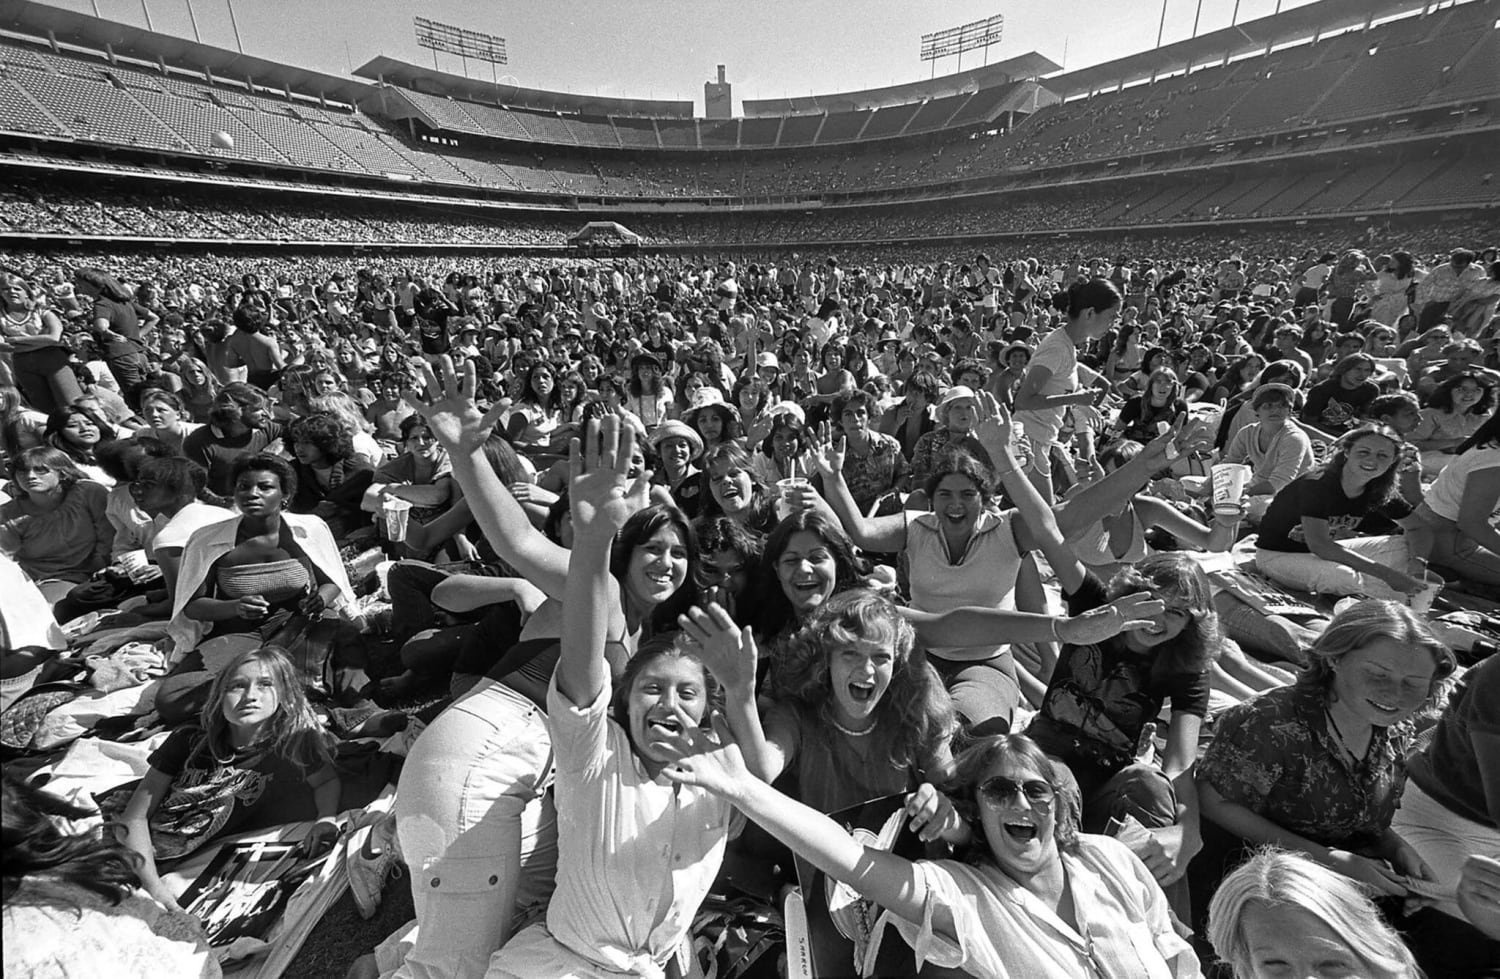 Crowd waiting for Bee Gees concert at Dodger Stadium, Los Angeles, CA (1979)